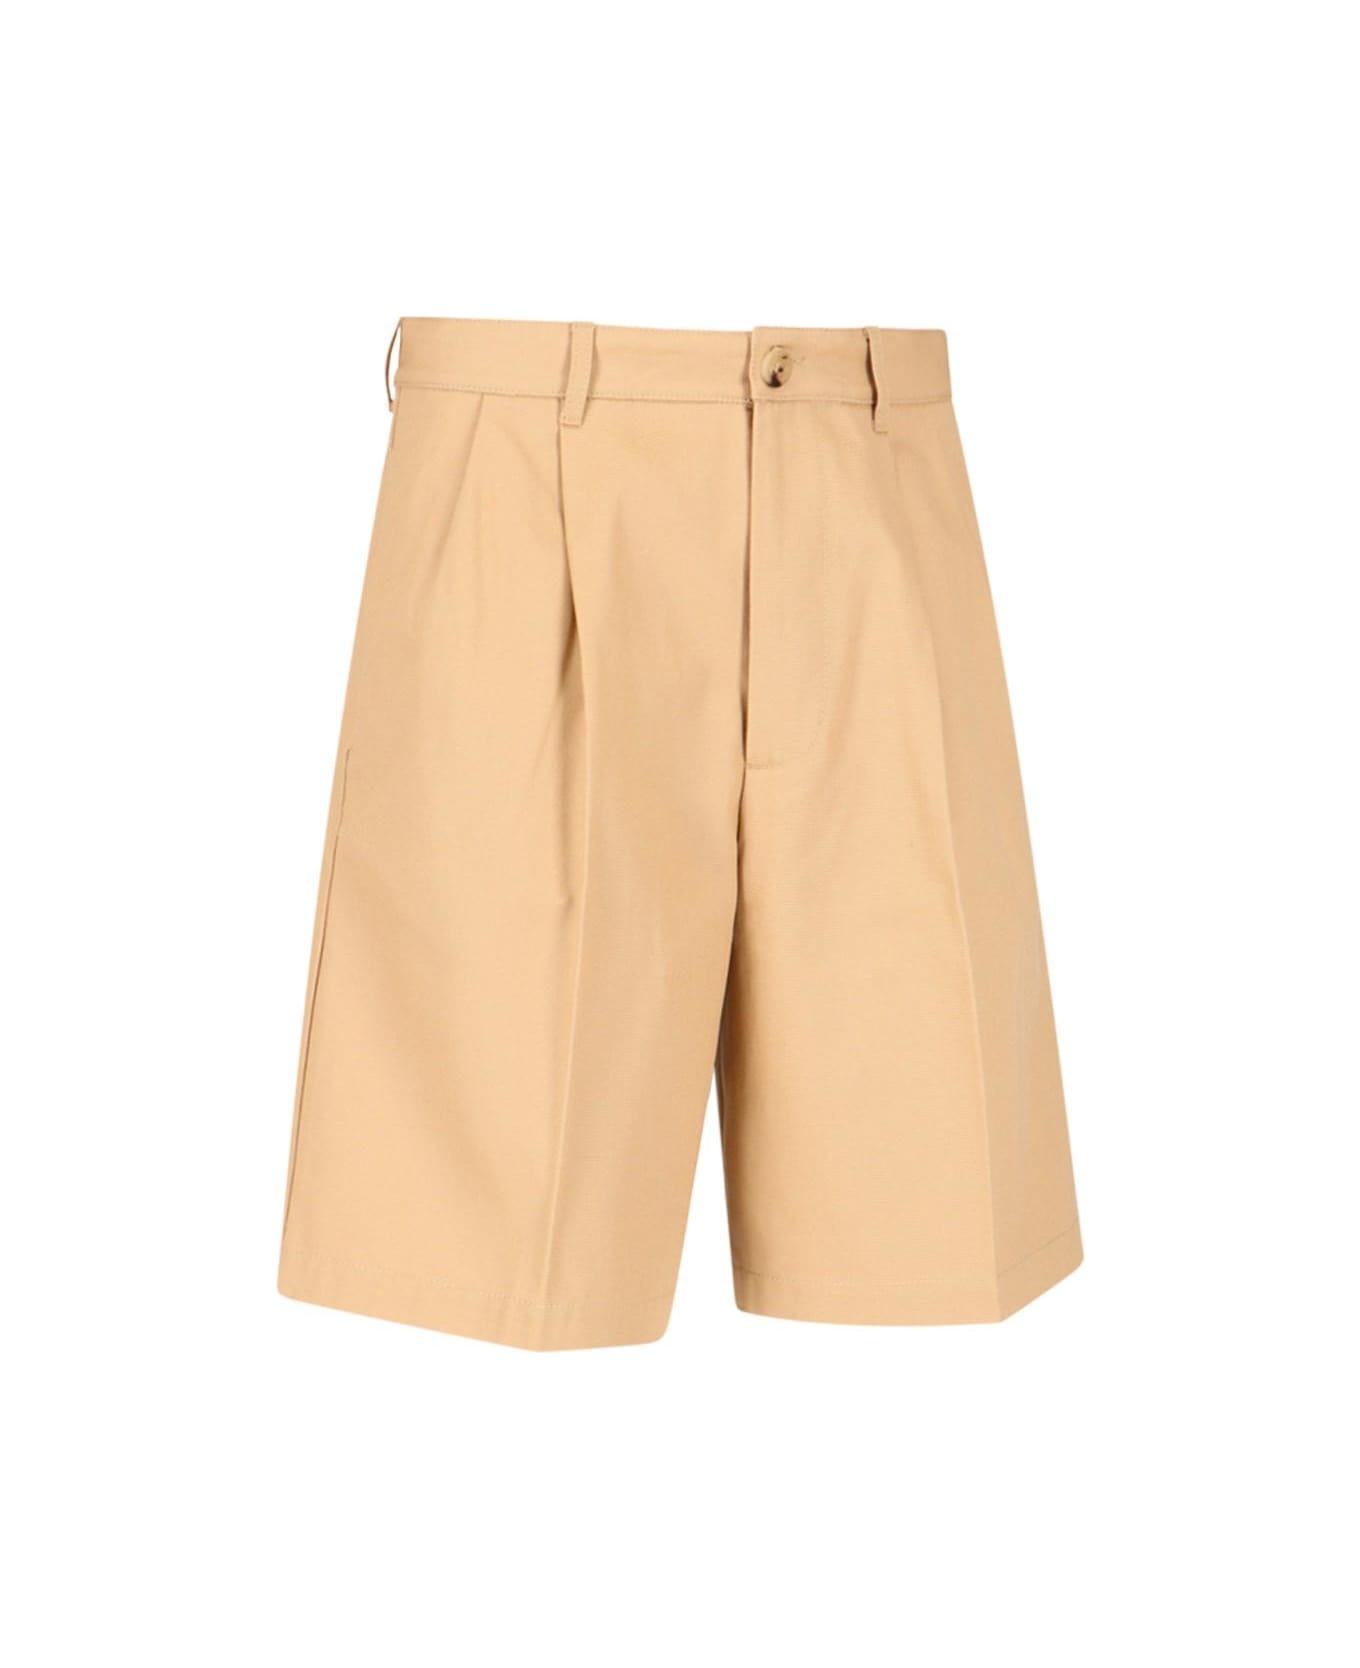 Gucci Back Embroidered Shorts - Beige